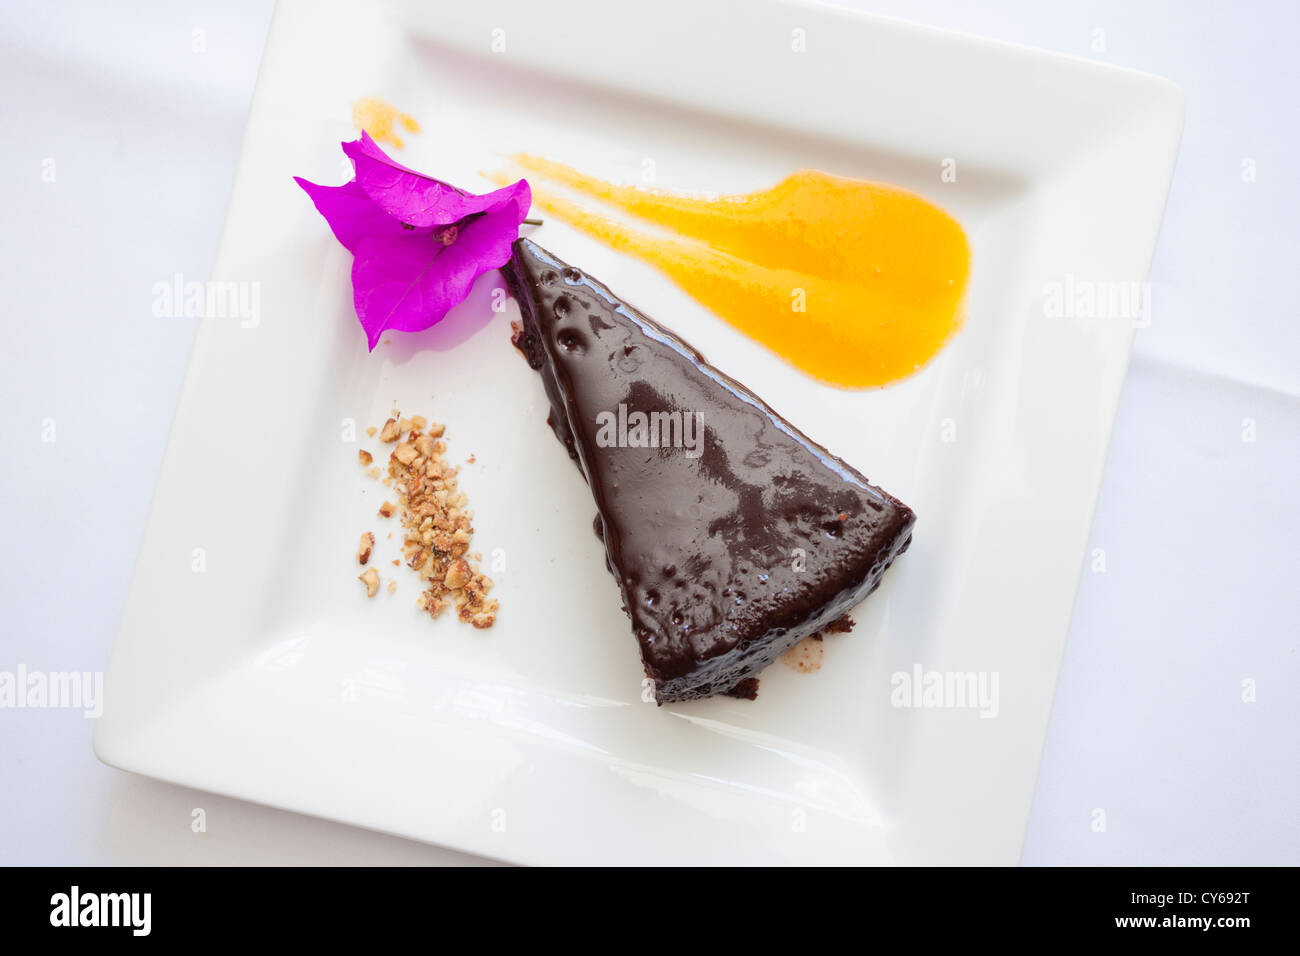 Chocolate cake with passion fruit sauce prepared by Chef Pilar Cabrera at La Olla restaurant in Oaxaca, Mexico Stock Photo